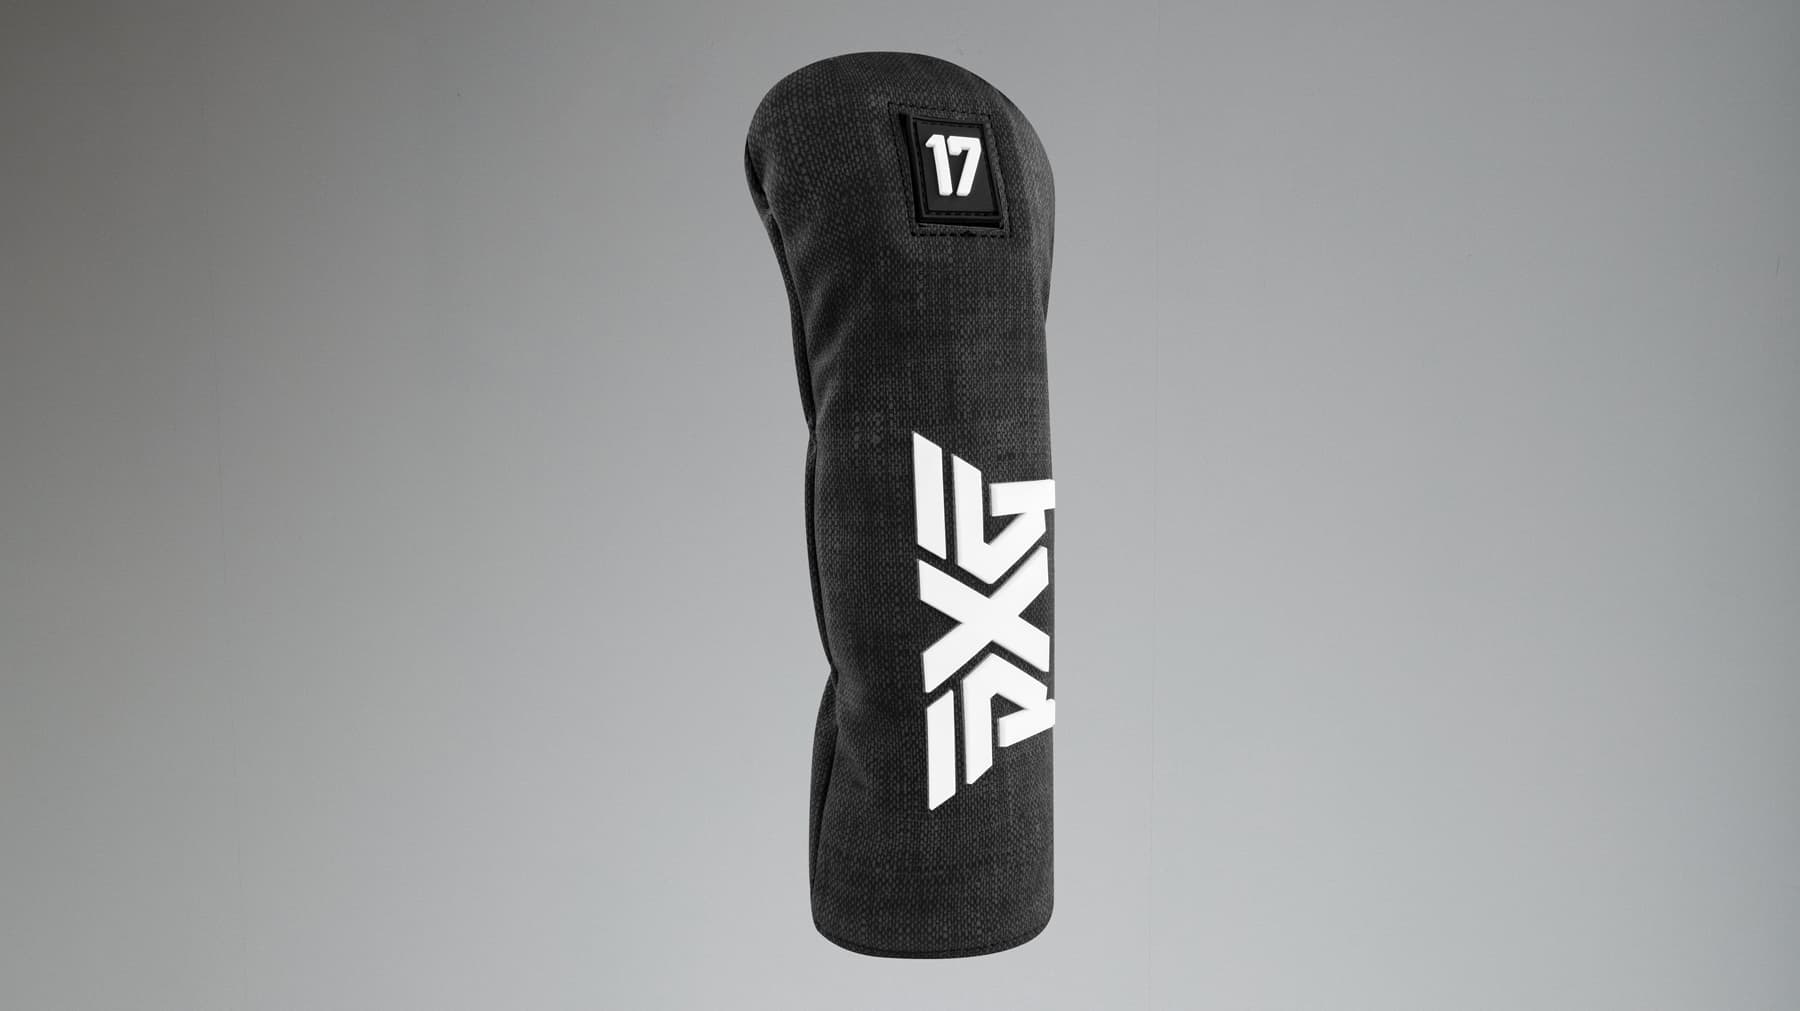 Deluxe Performance Hybrid Headcover | Golf Headcovers | PXG